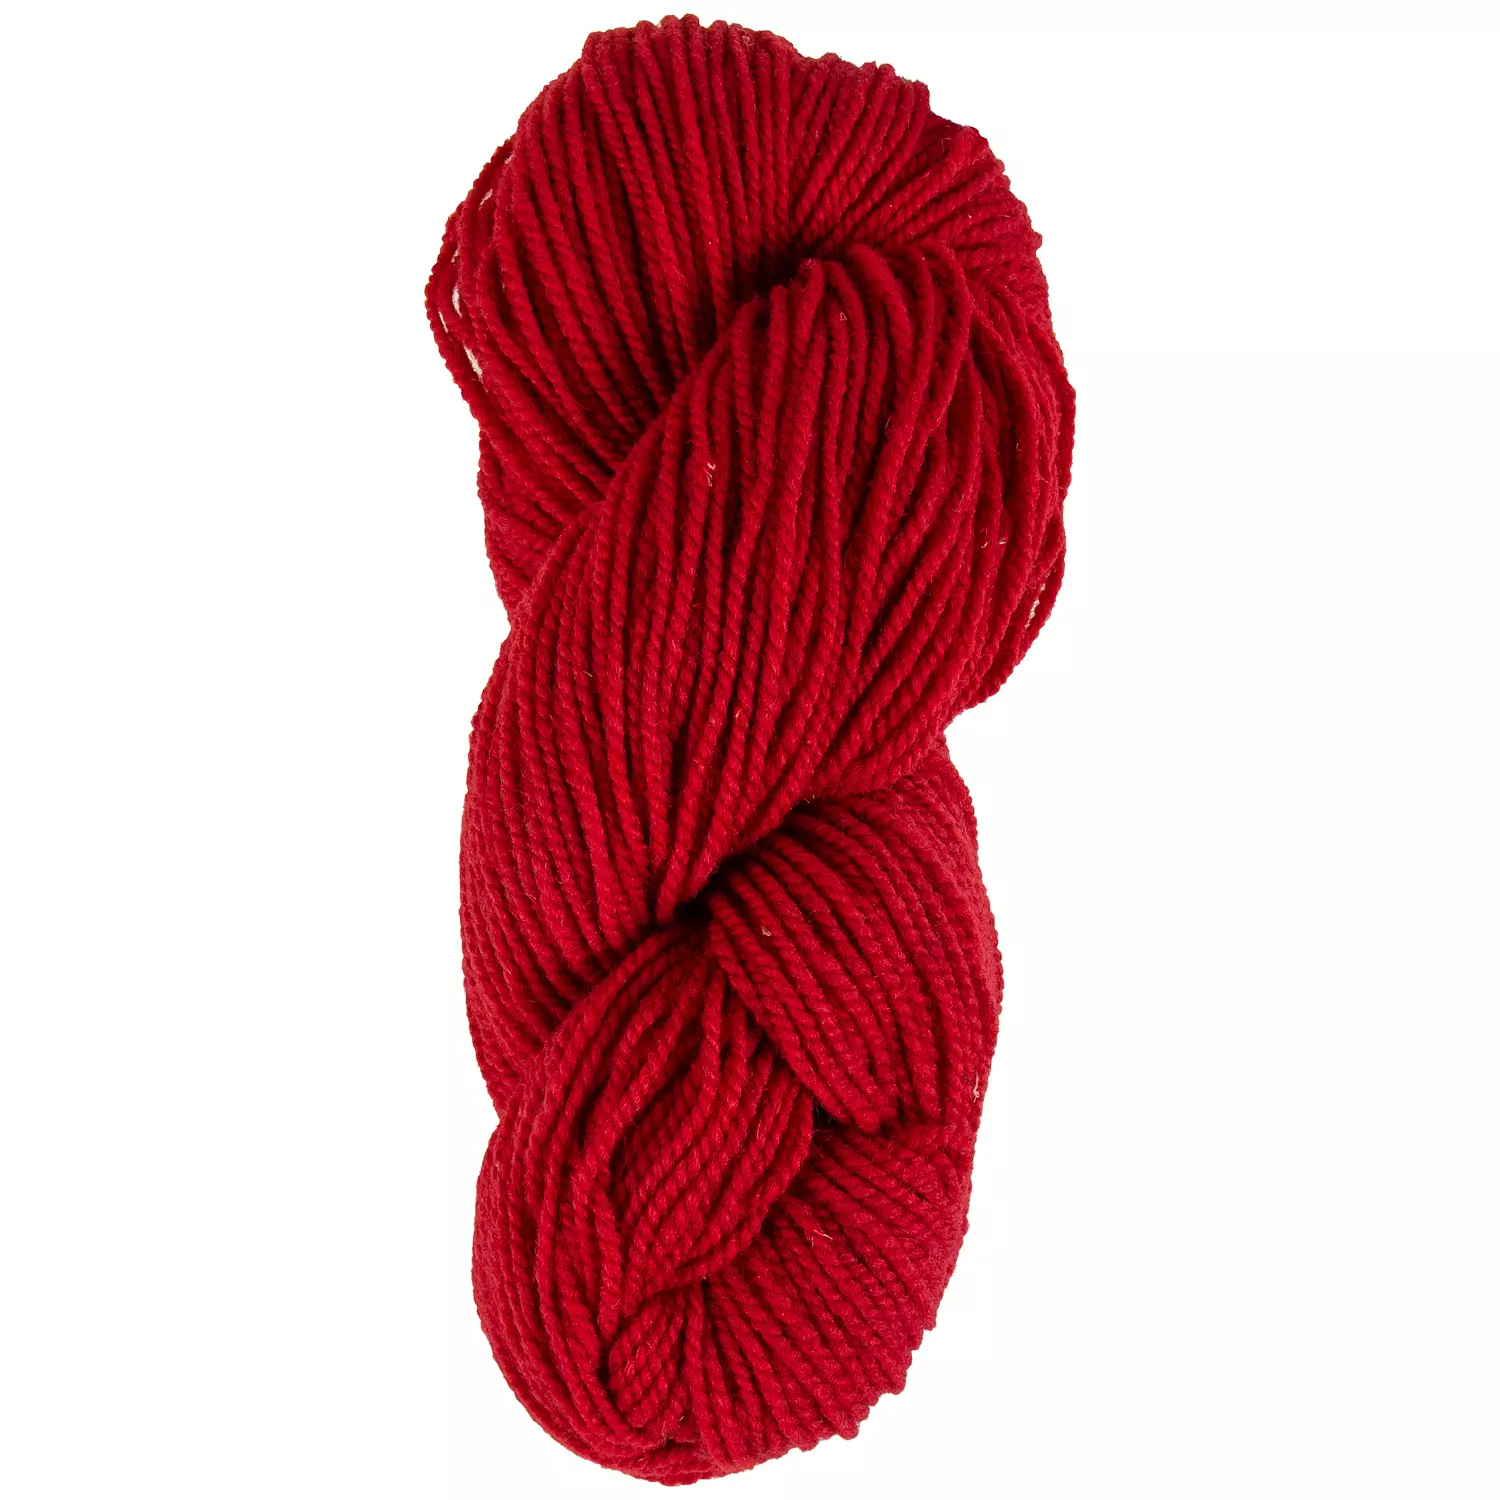 Briggs & Little - Heritage, 100% wool, 2-ply yarn, red. Colour: red